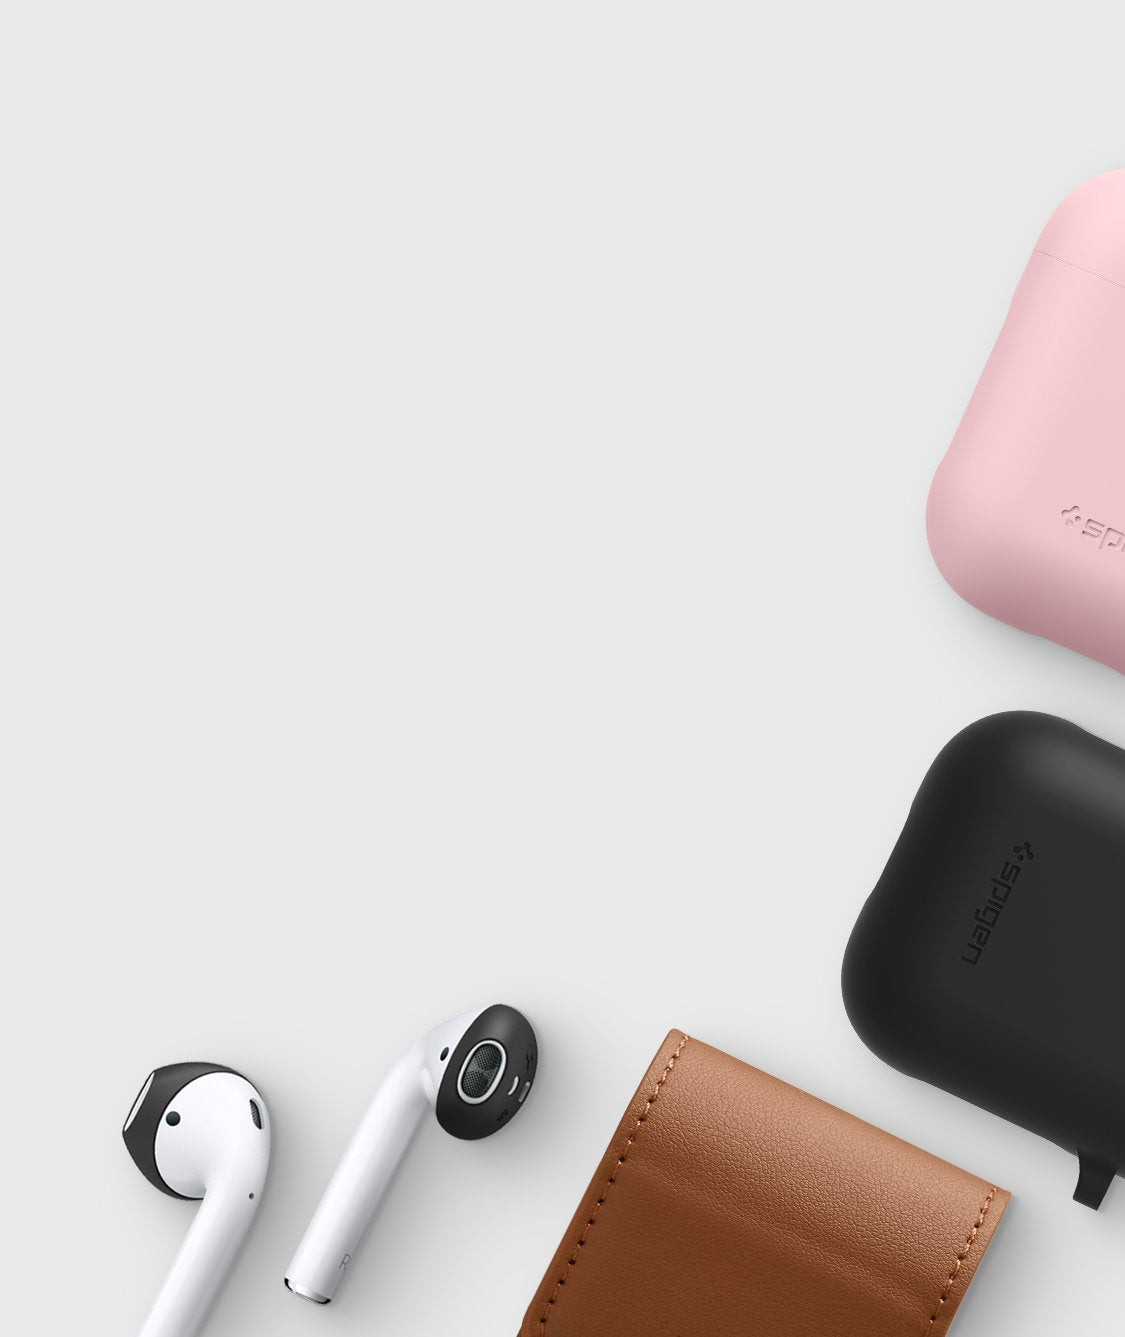 Spigen Cases And Accessories for Apple AirPods